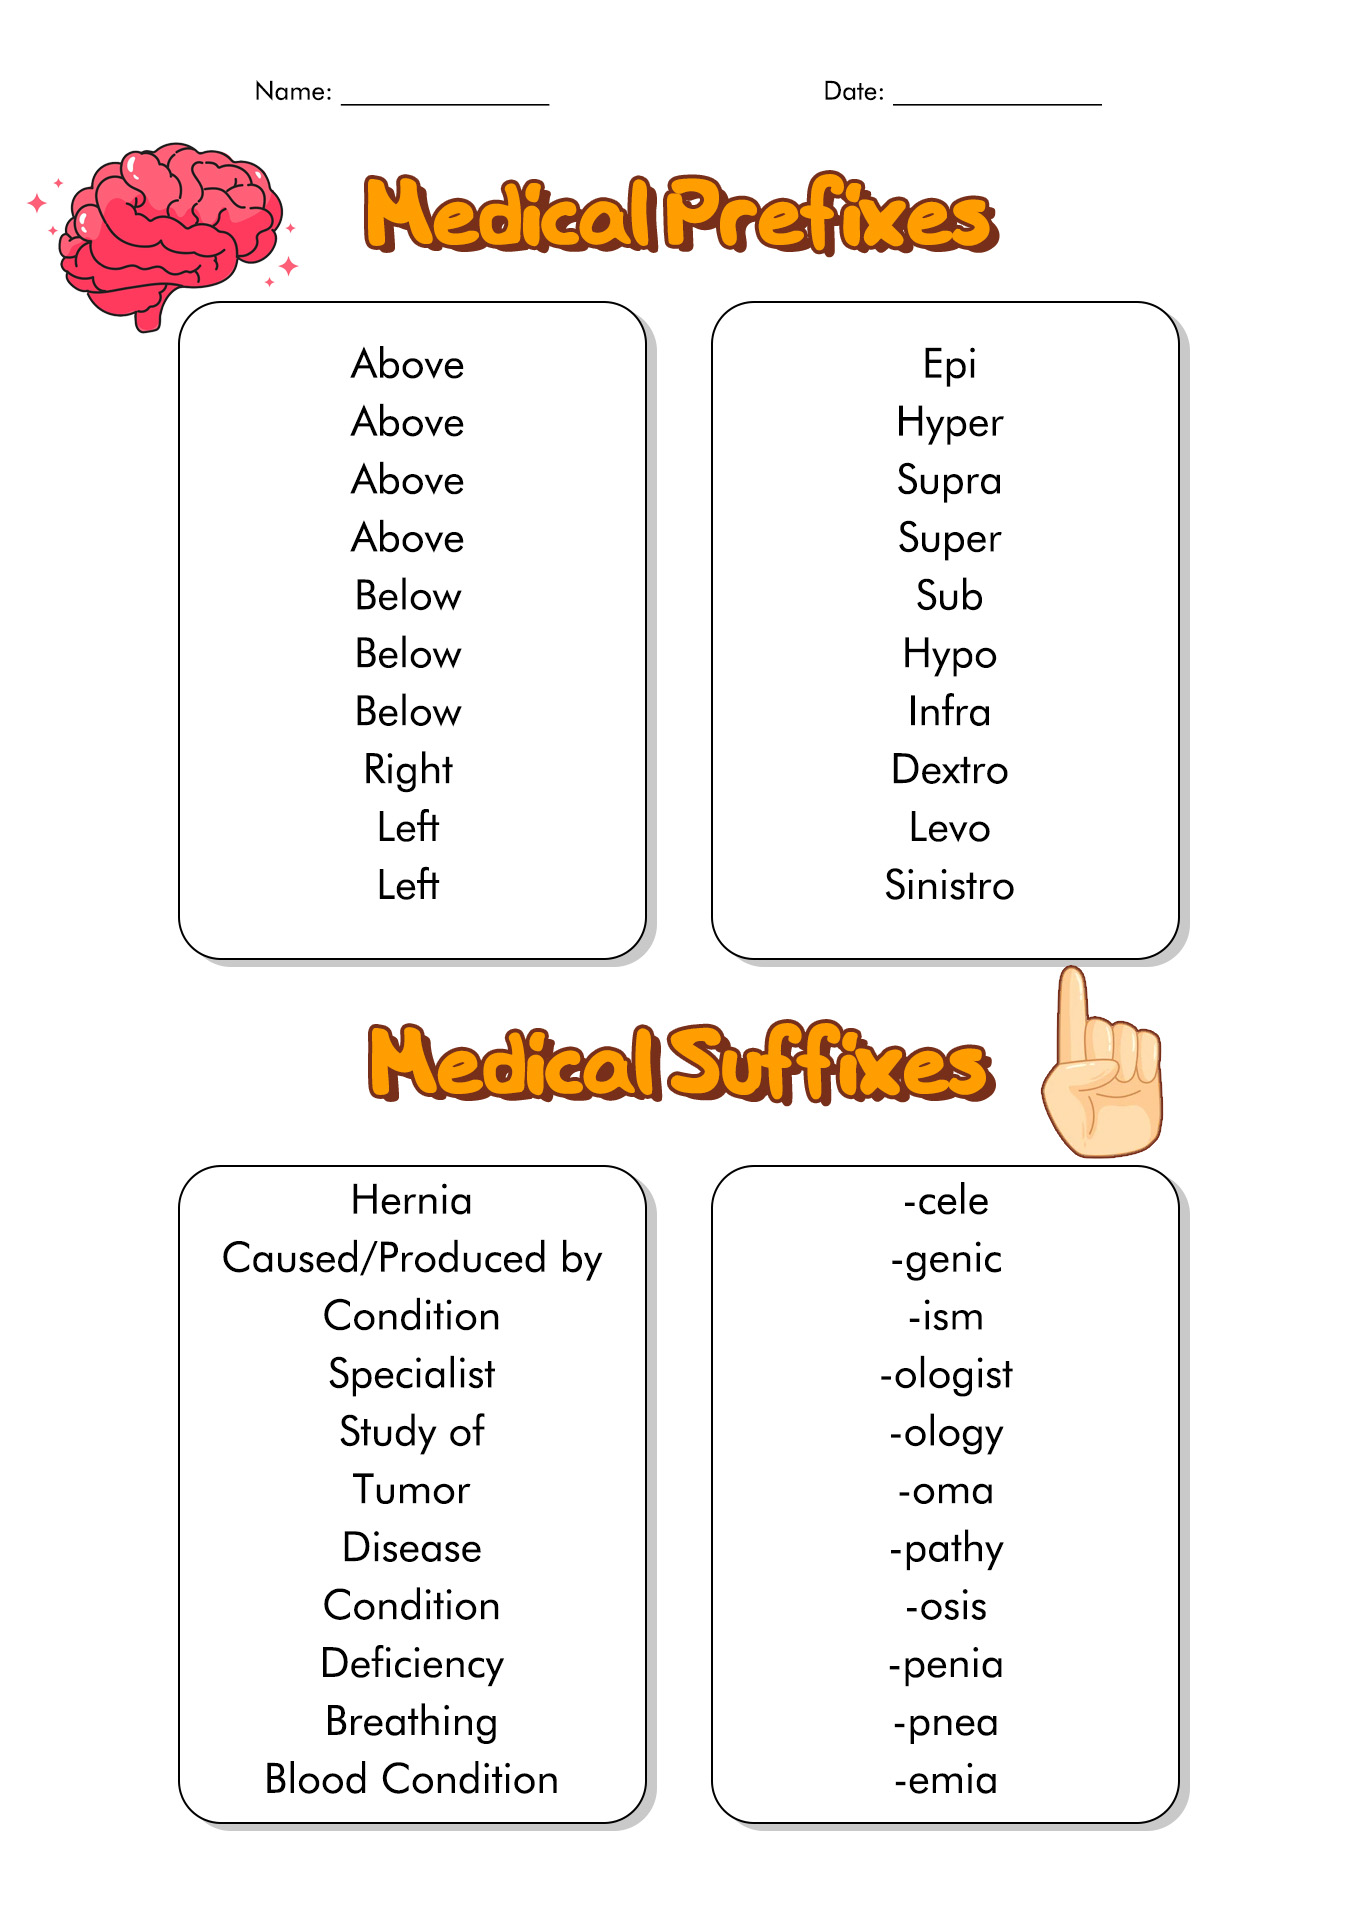 17-best-images-of-medical-prefixes-and-suffixes-worksheets-root-words